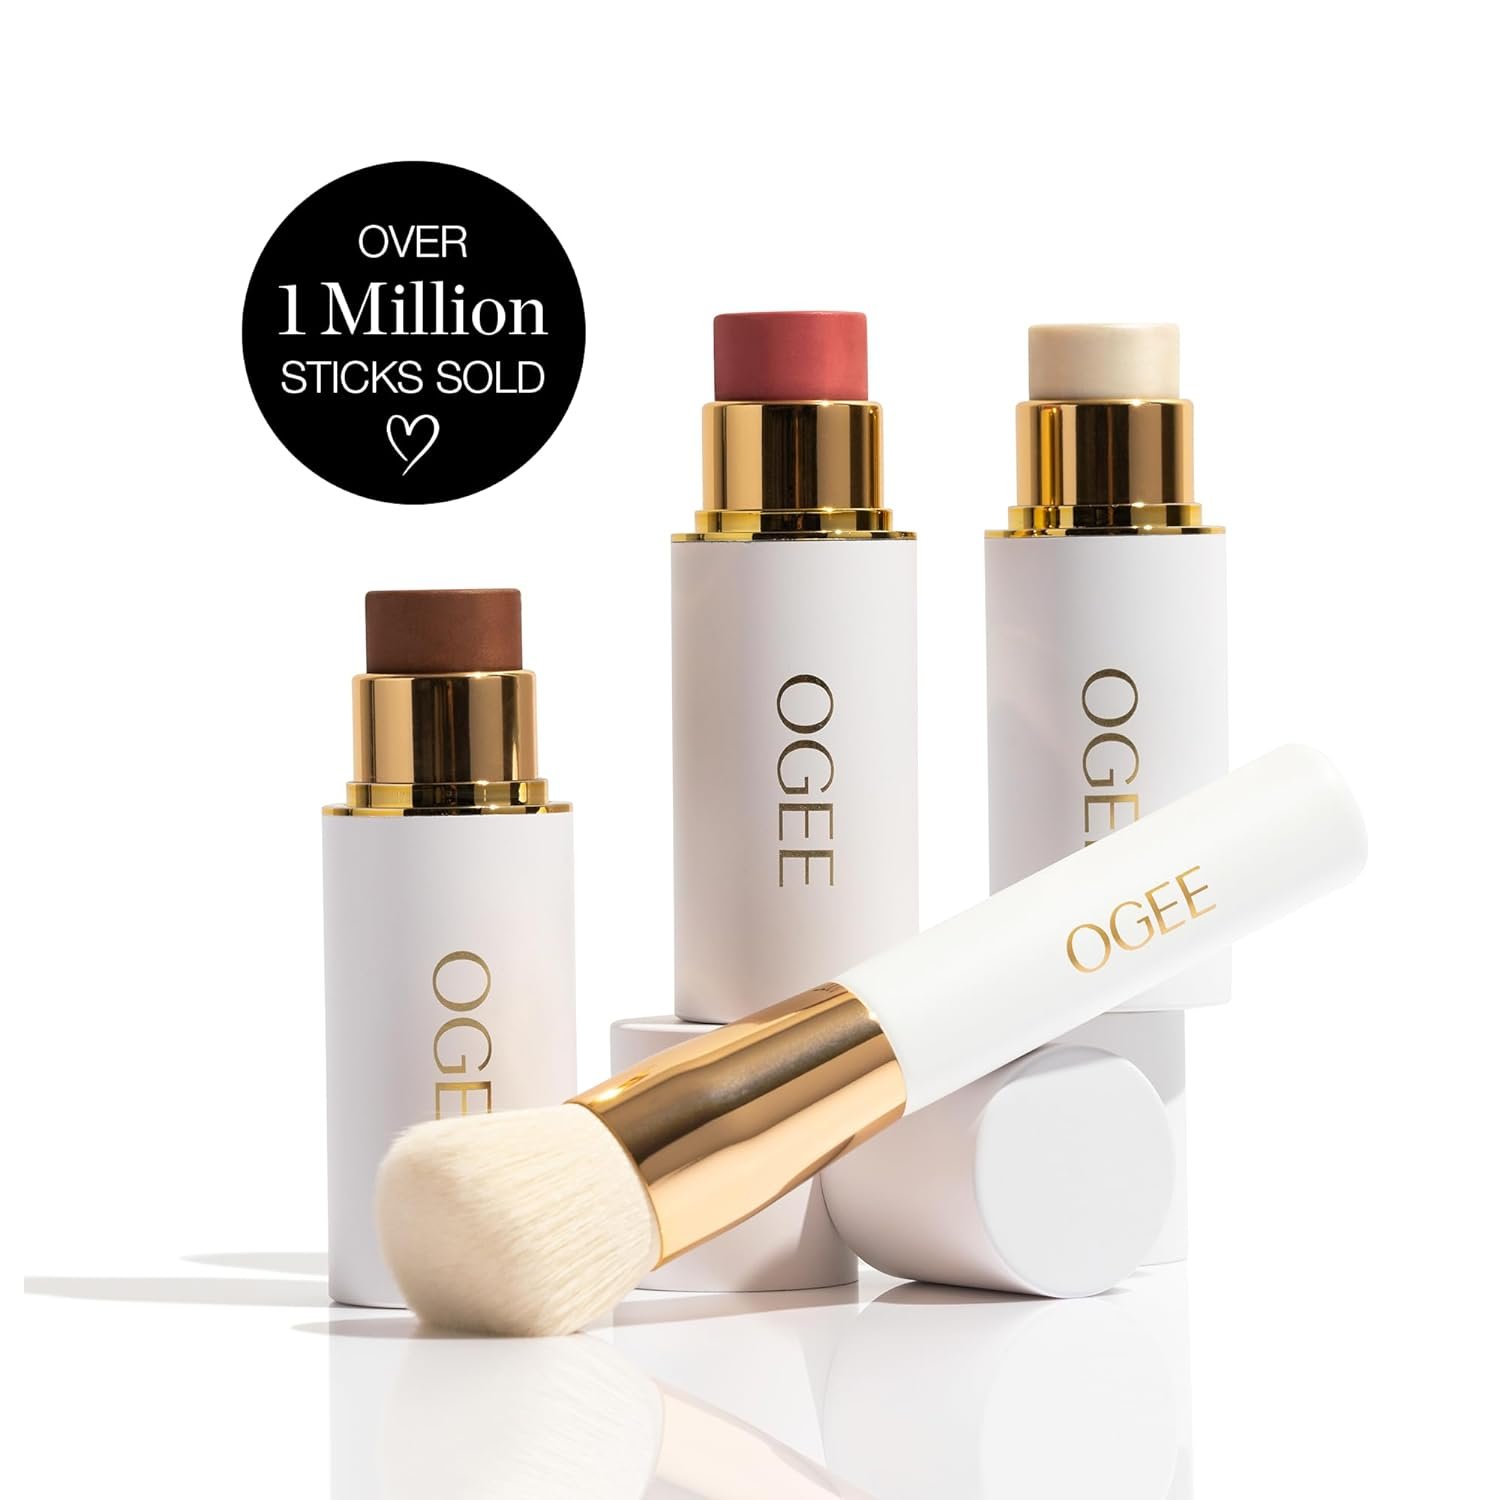 Ogee Face Stick Crystal Collection Trio - Contour Stick Makeup Collection - Certified Organic Contour Palette - Includes Bronzer Stick, Blush Stick  Highlighter Stick